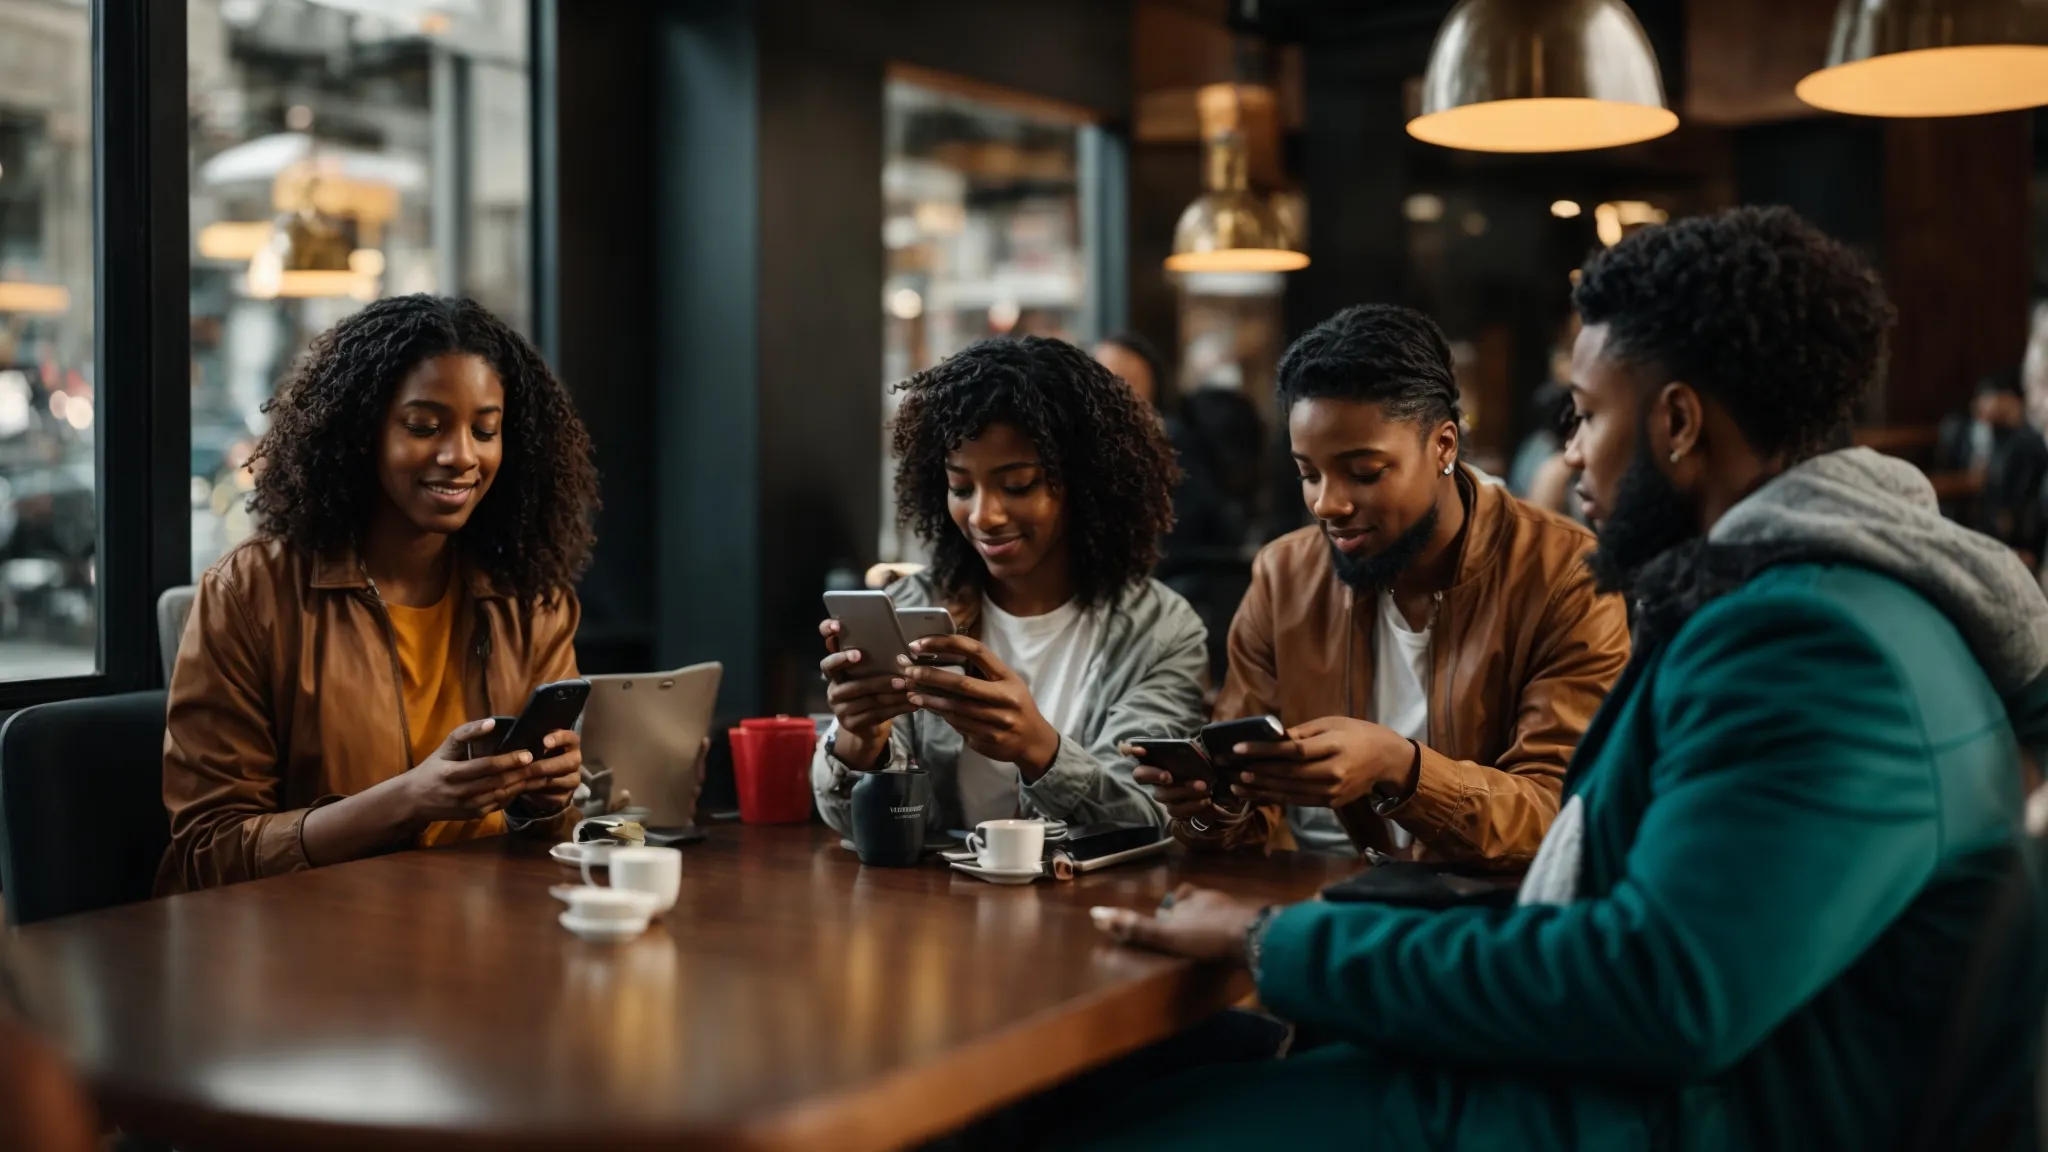 a diverse group of people engaged with their smartphones and tablets in a vibrant, bustling cafe, symbolizing the connectivity and targeted engagement of social media.